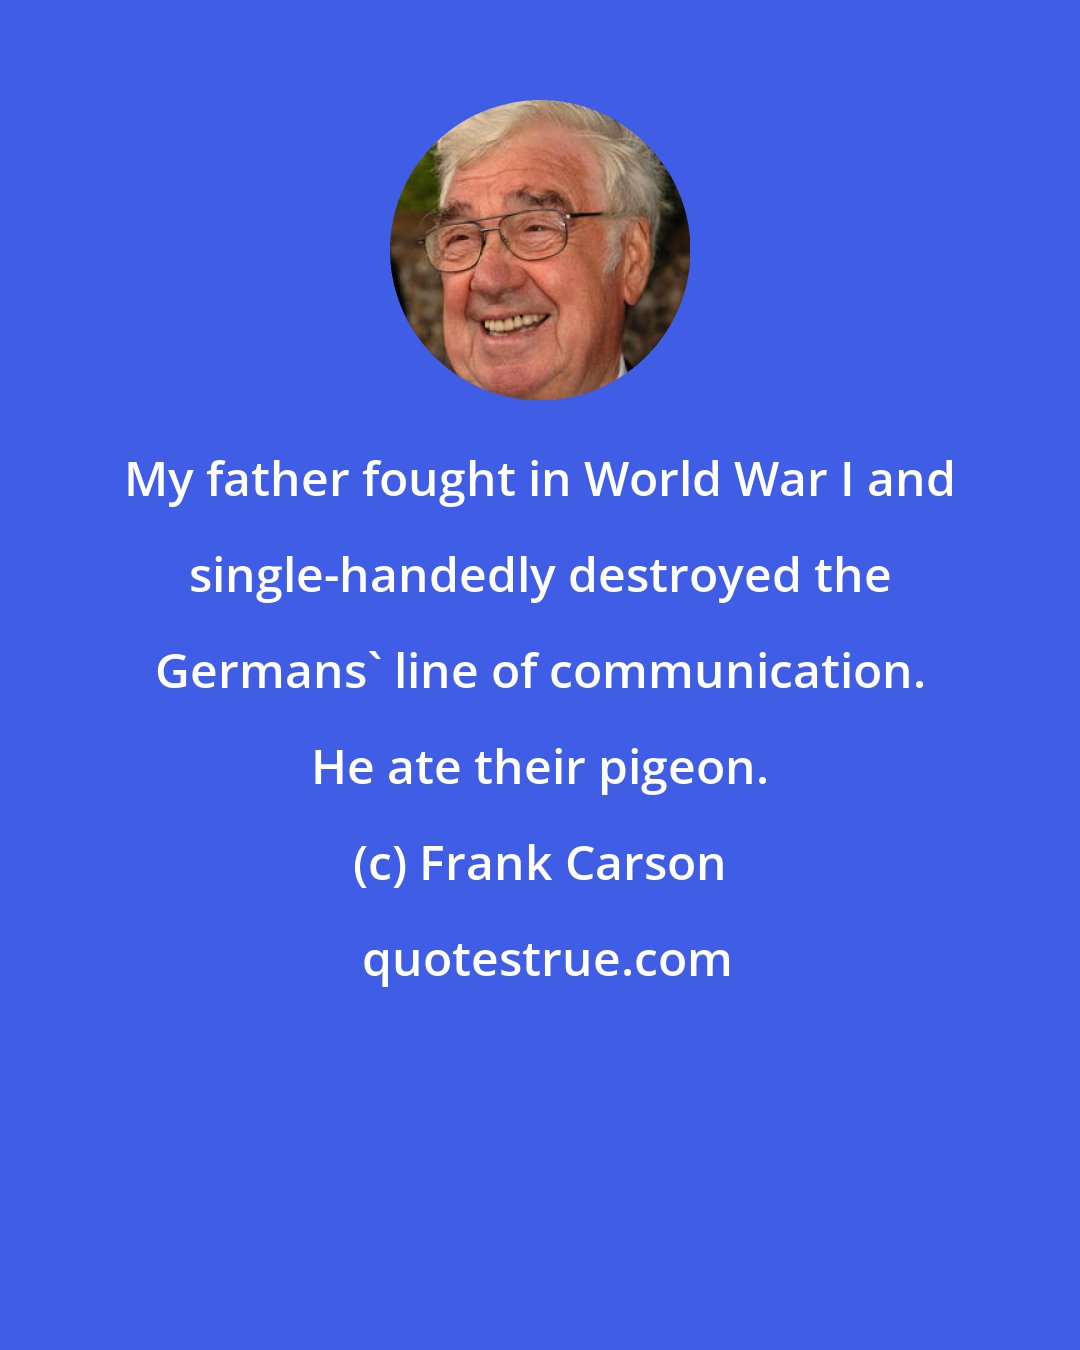 Frank Carson: My father fought in World War I and single-handedly destroyed the Germans' line of communication. He ate their pigeon.